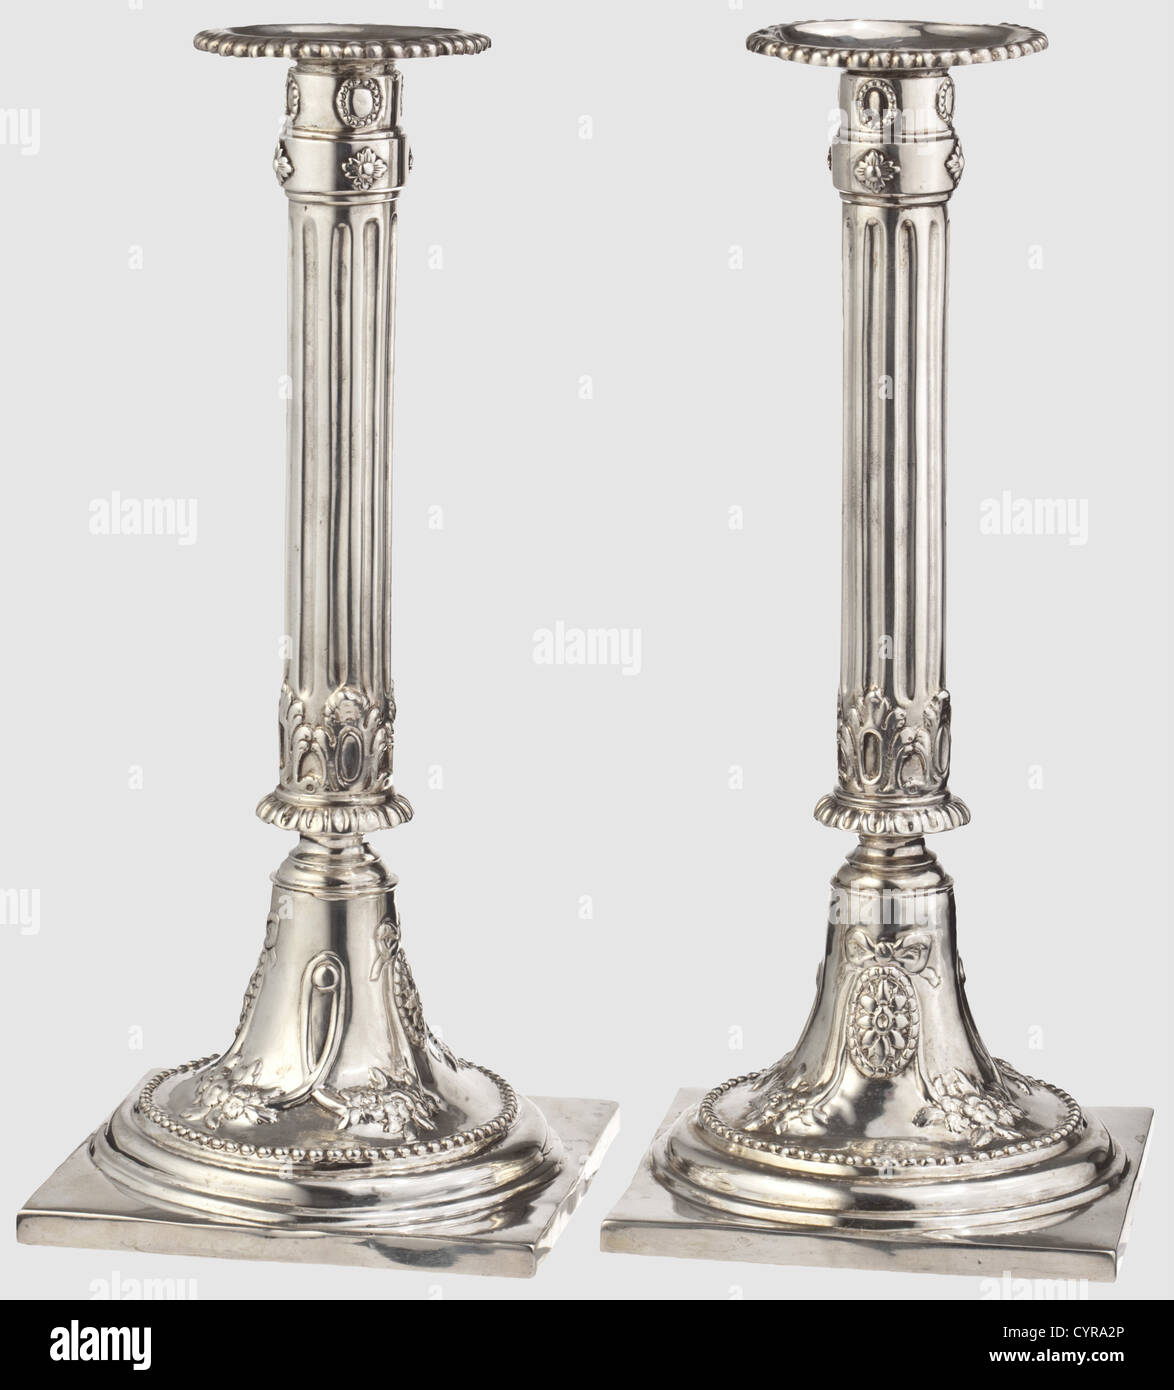 A pair of silver Empire candlesticks,Augsburg,circa 1785 Square plinths,the round candlestick feet decorated with garlands and flowers in relief.Fluted column shafts,inserted sockets with beaded edges.Each marked with the 'ICM' master's mark and the Augsburg inspection mark for the years 1785 - 87.The insert sockets bear Munich acceptance marks.Heavily cleaned,the edges of the plinths have been resoldered in places.Height of each 26.5 cm.Weight together 897 g.Johann Martin Langenbauer,active in Augsburg from 1747 to 1792.Cf.Rosenberg,vol.1,no.,Additional-Rights-Clearences-Not Available Stock Photo